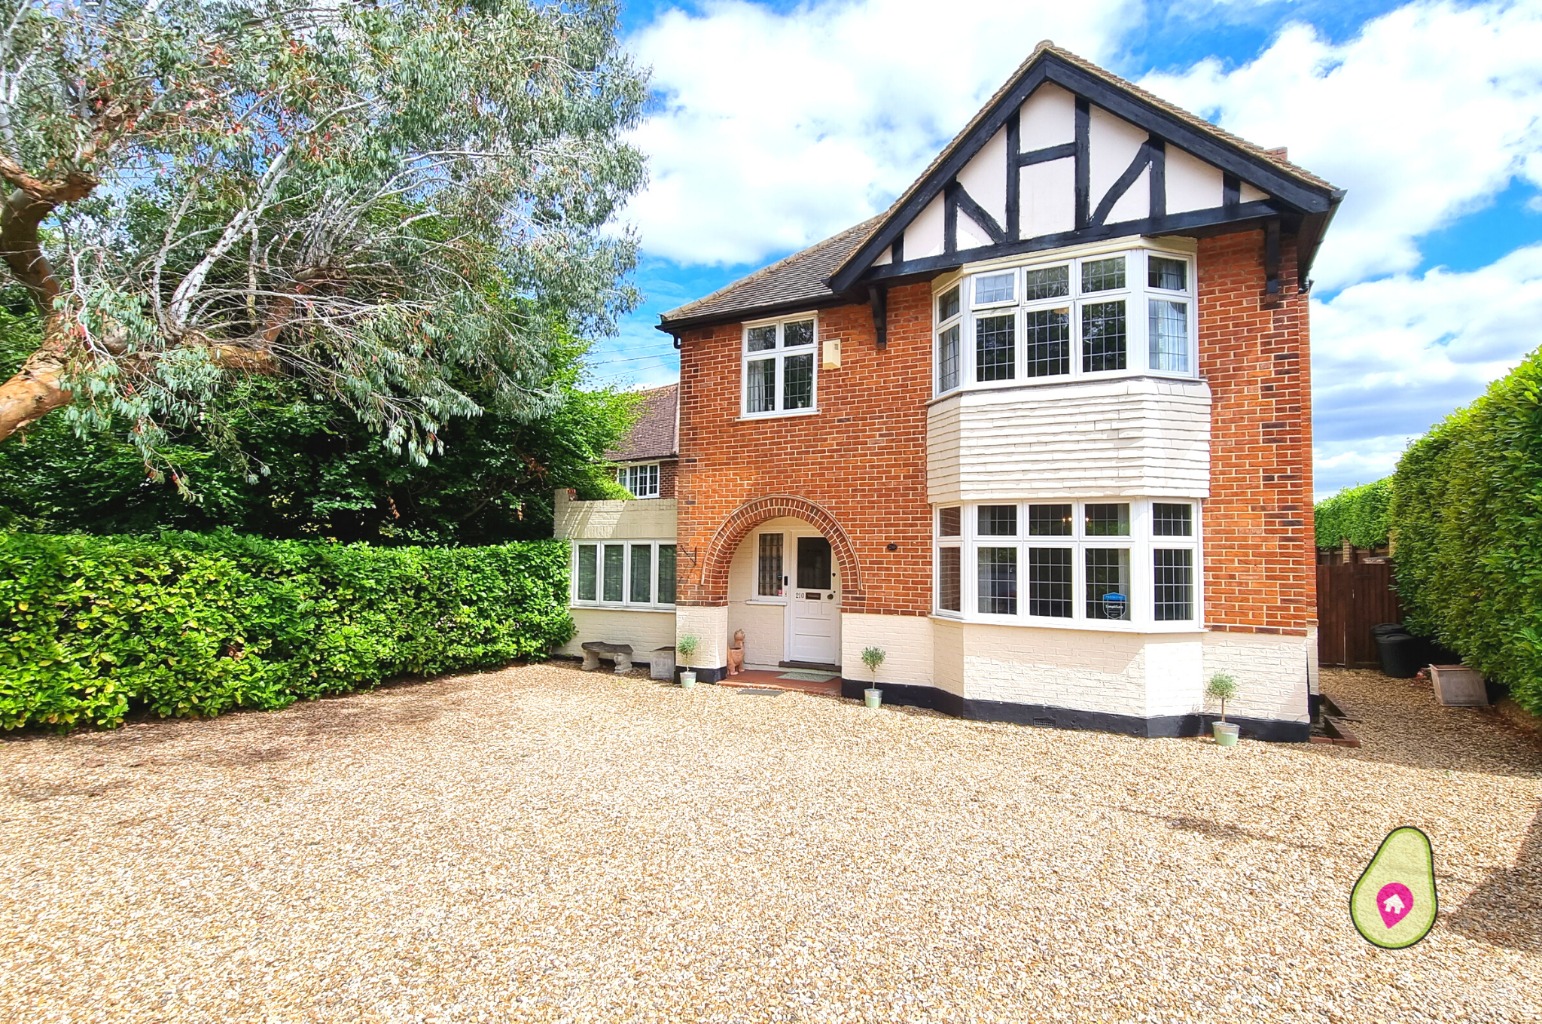 4 bed detached house for sale in Finchampstead Road, Wokingham, RG40